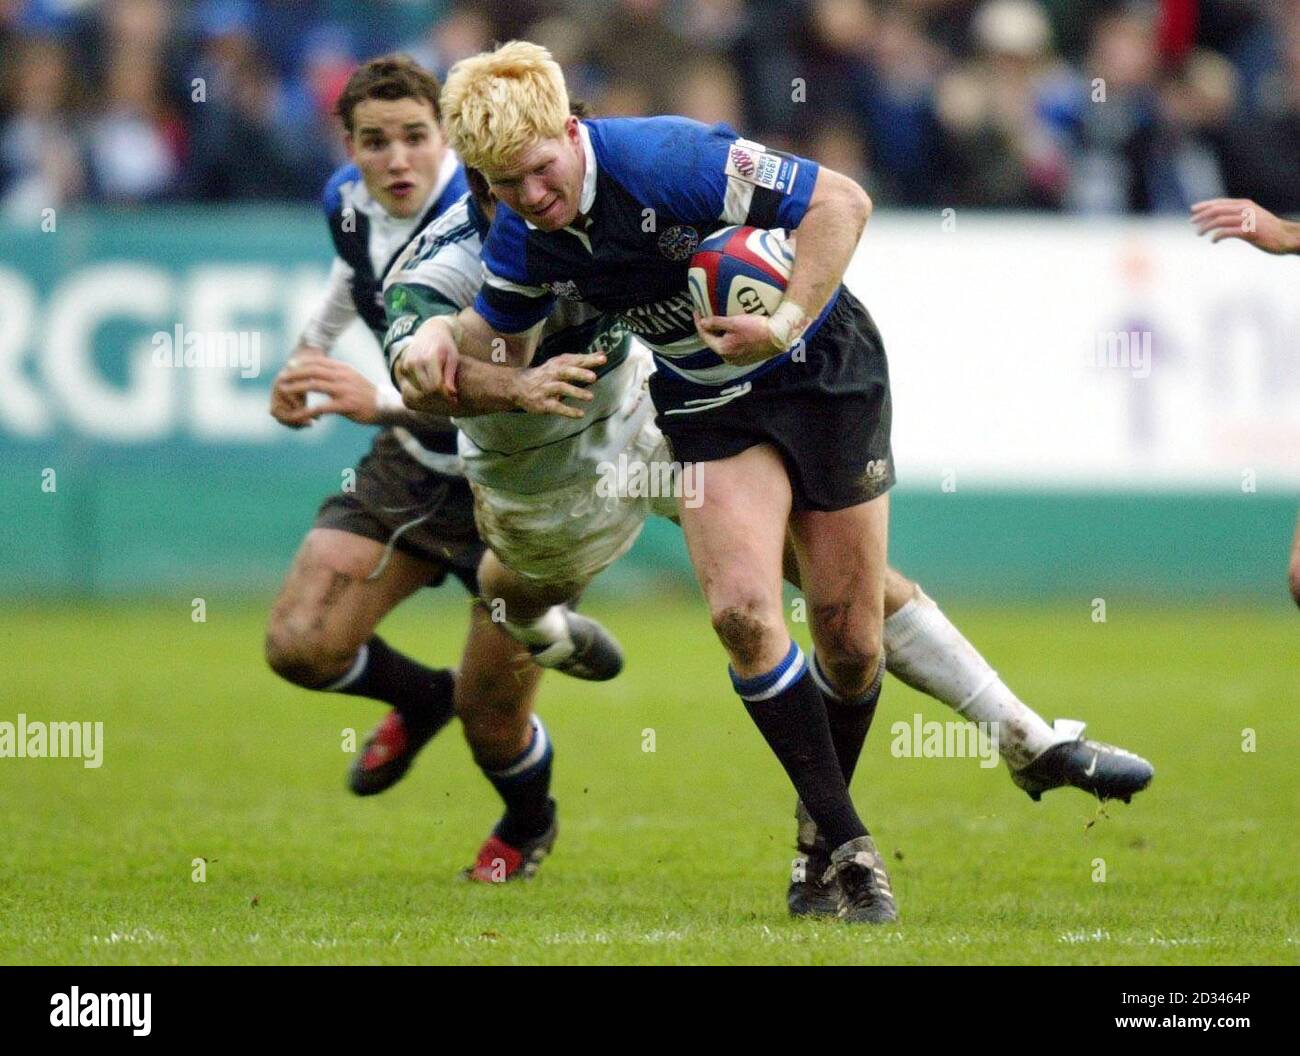 Alex Crockett of Bath (right) hands off the tackle of London Irish player Scott Staniforth during the Zurich Premiership match at the Recreation Ground, Bath. Stock Photo